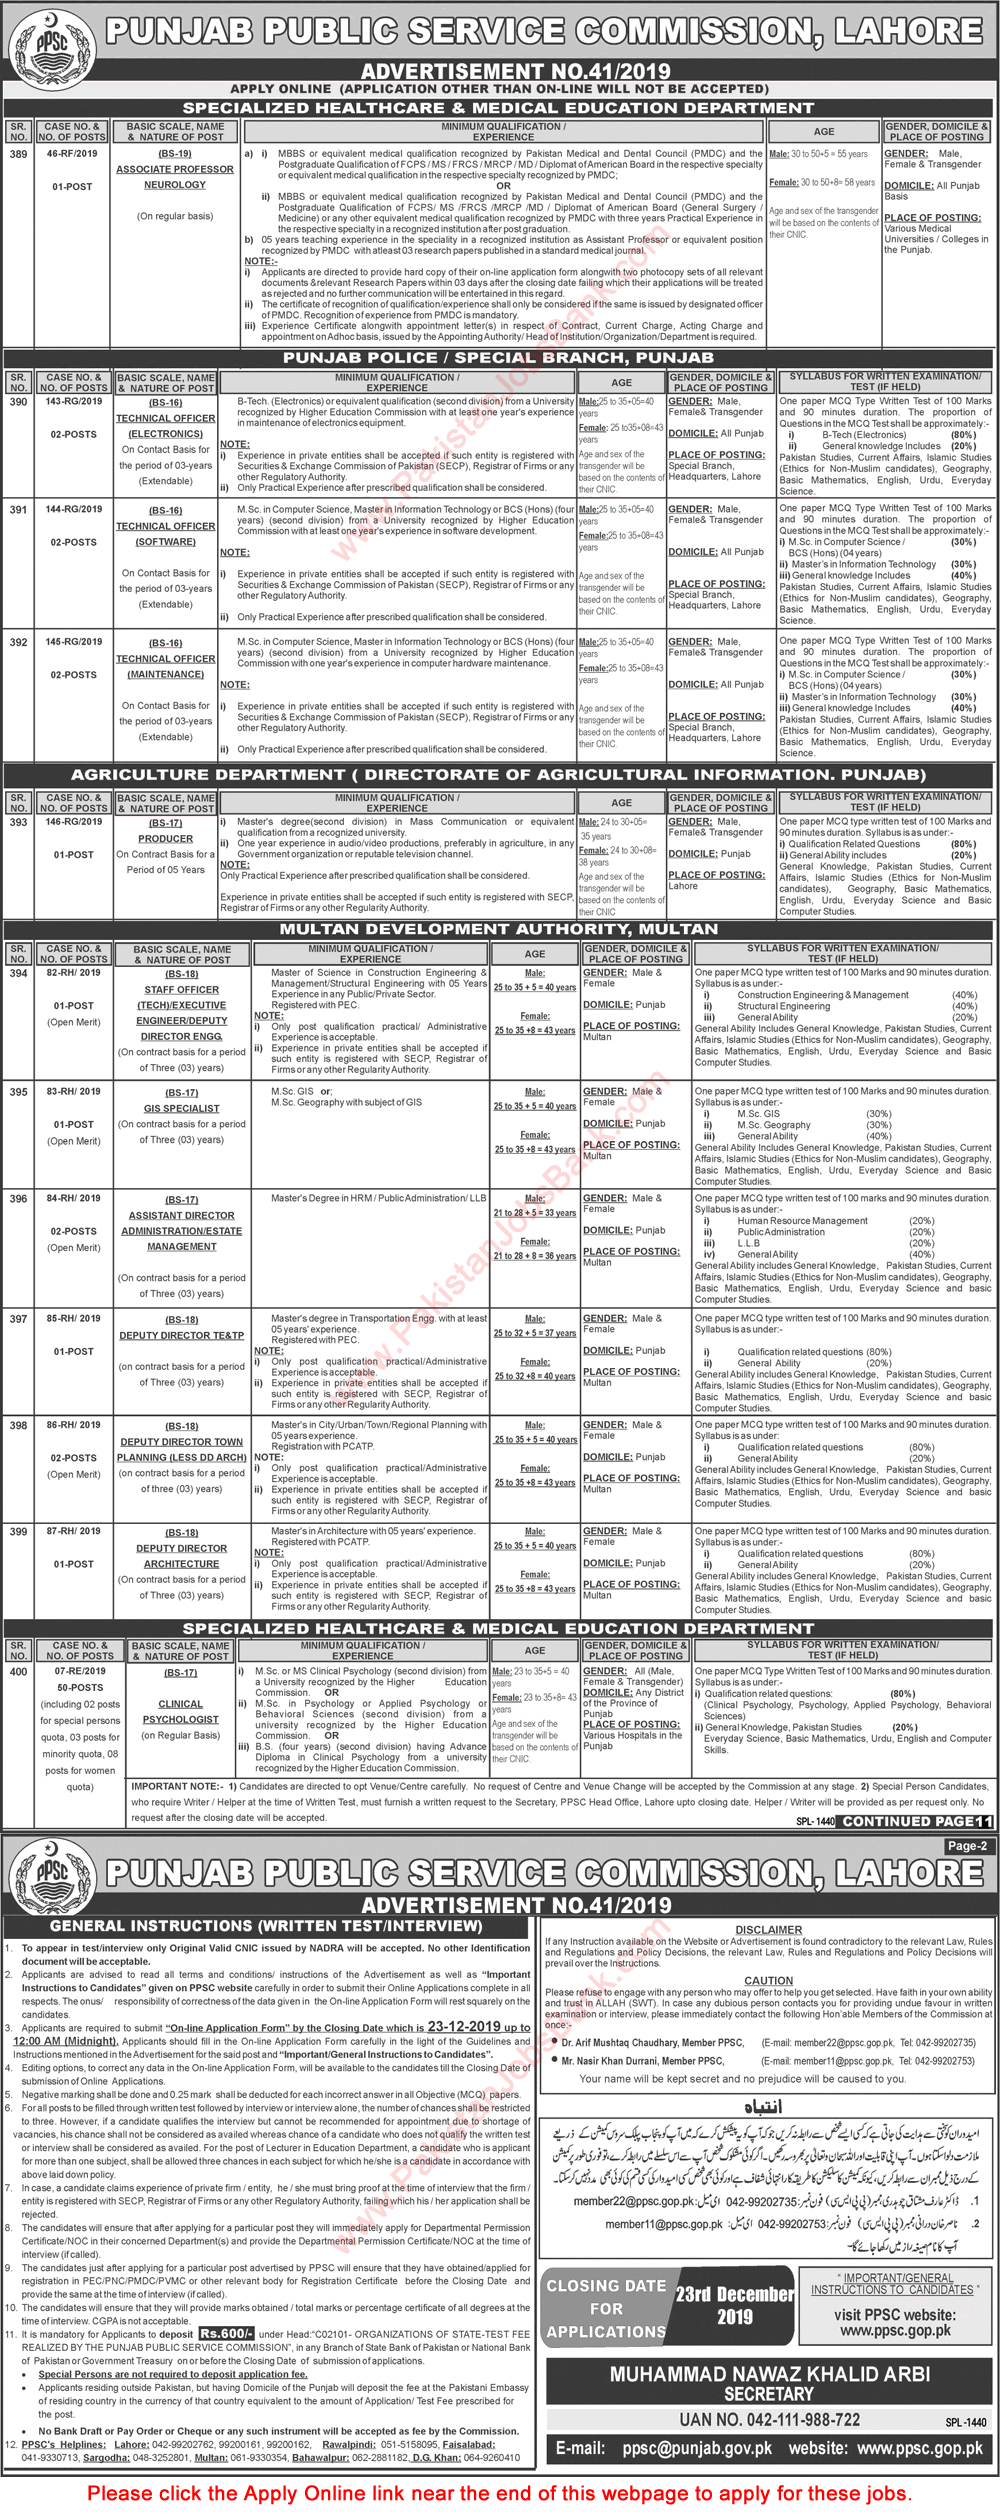 PPSC Jobs December 2019 Apply Online Consolidated Advertisement No 41/2019 Latest